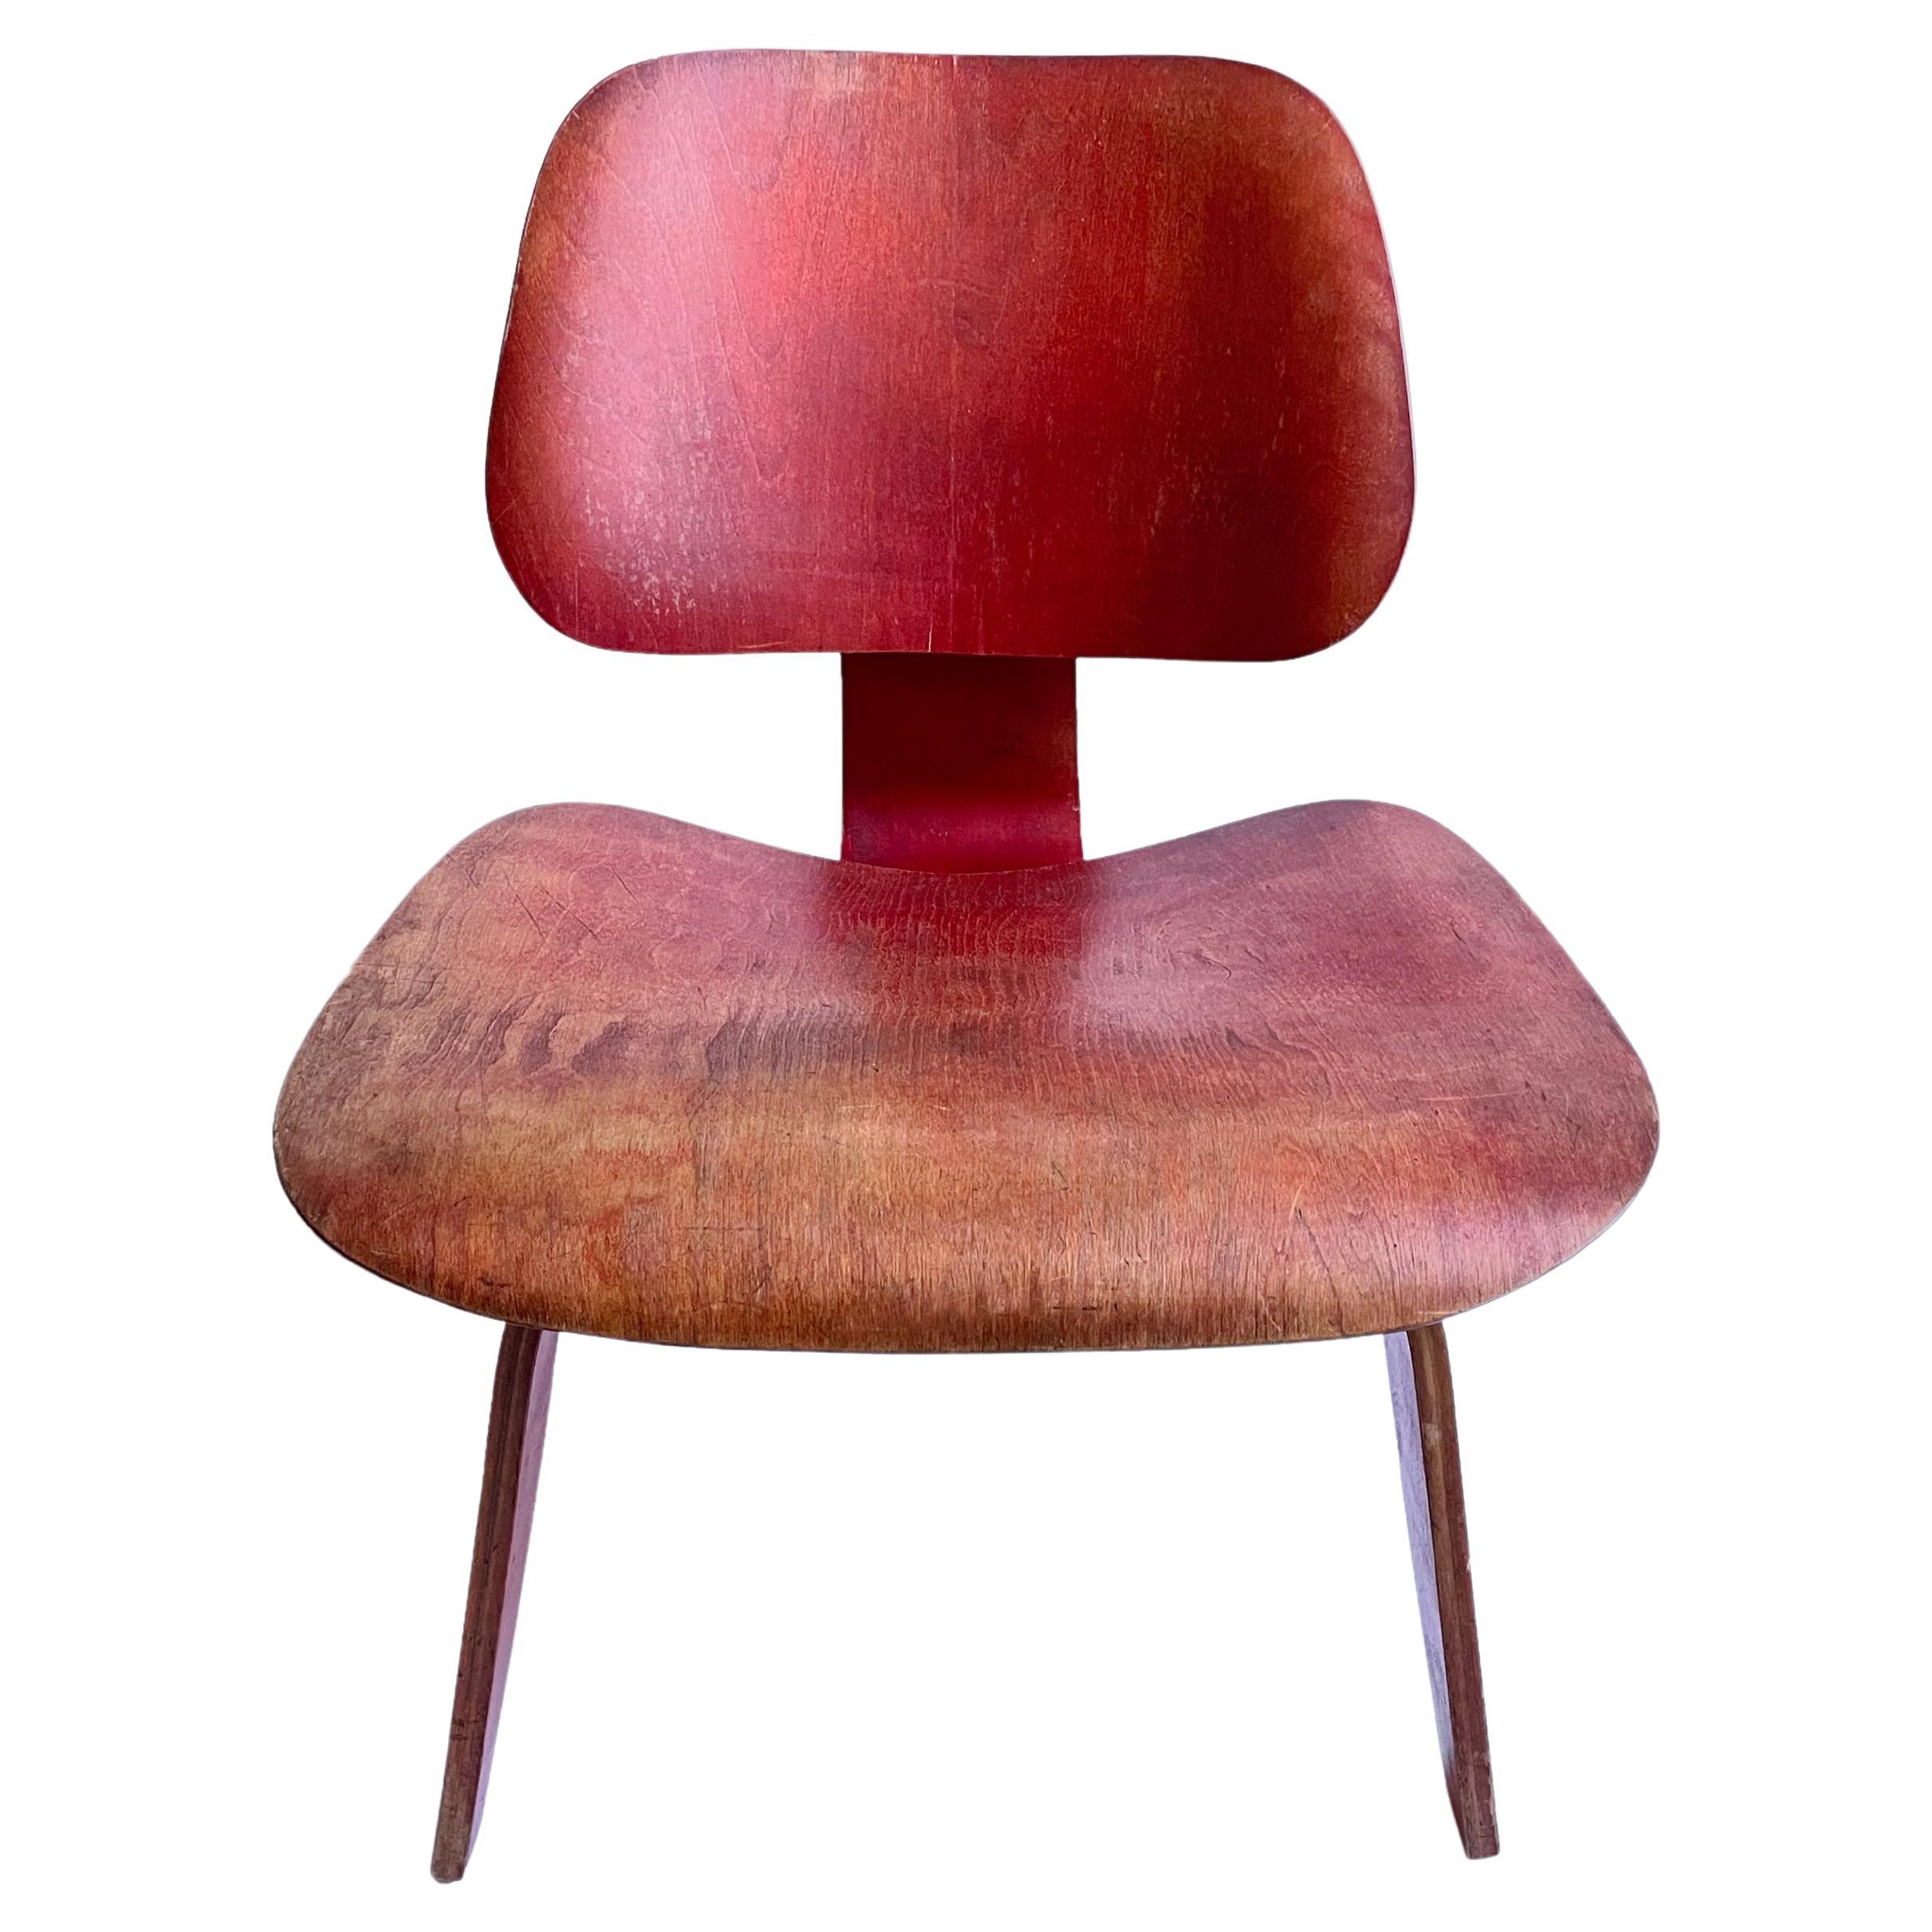 Herman Miller Eames LCW Roter Anilinfarbstoff im Angebot